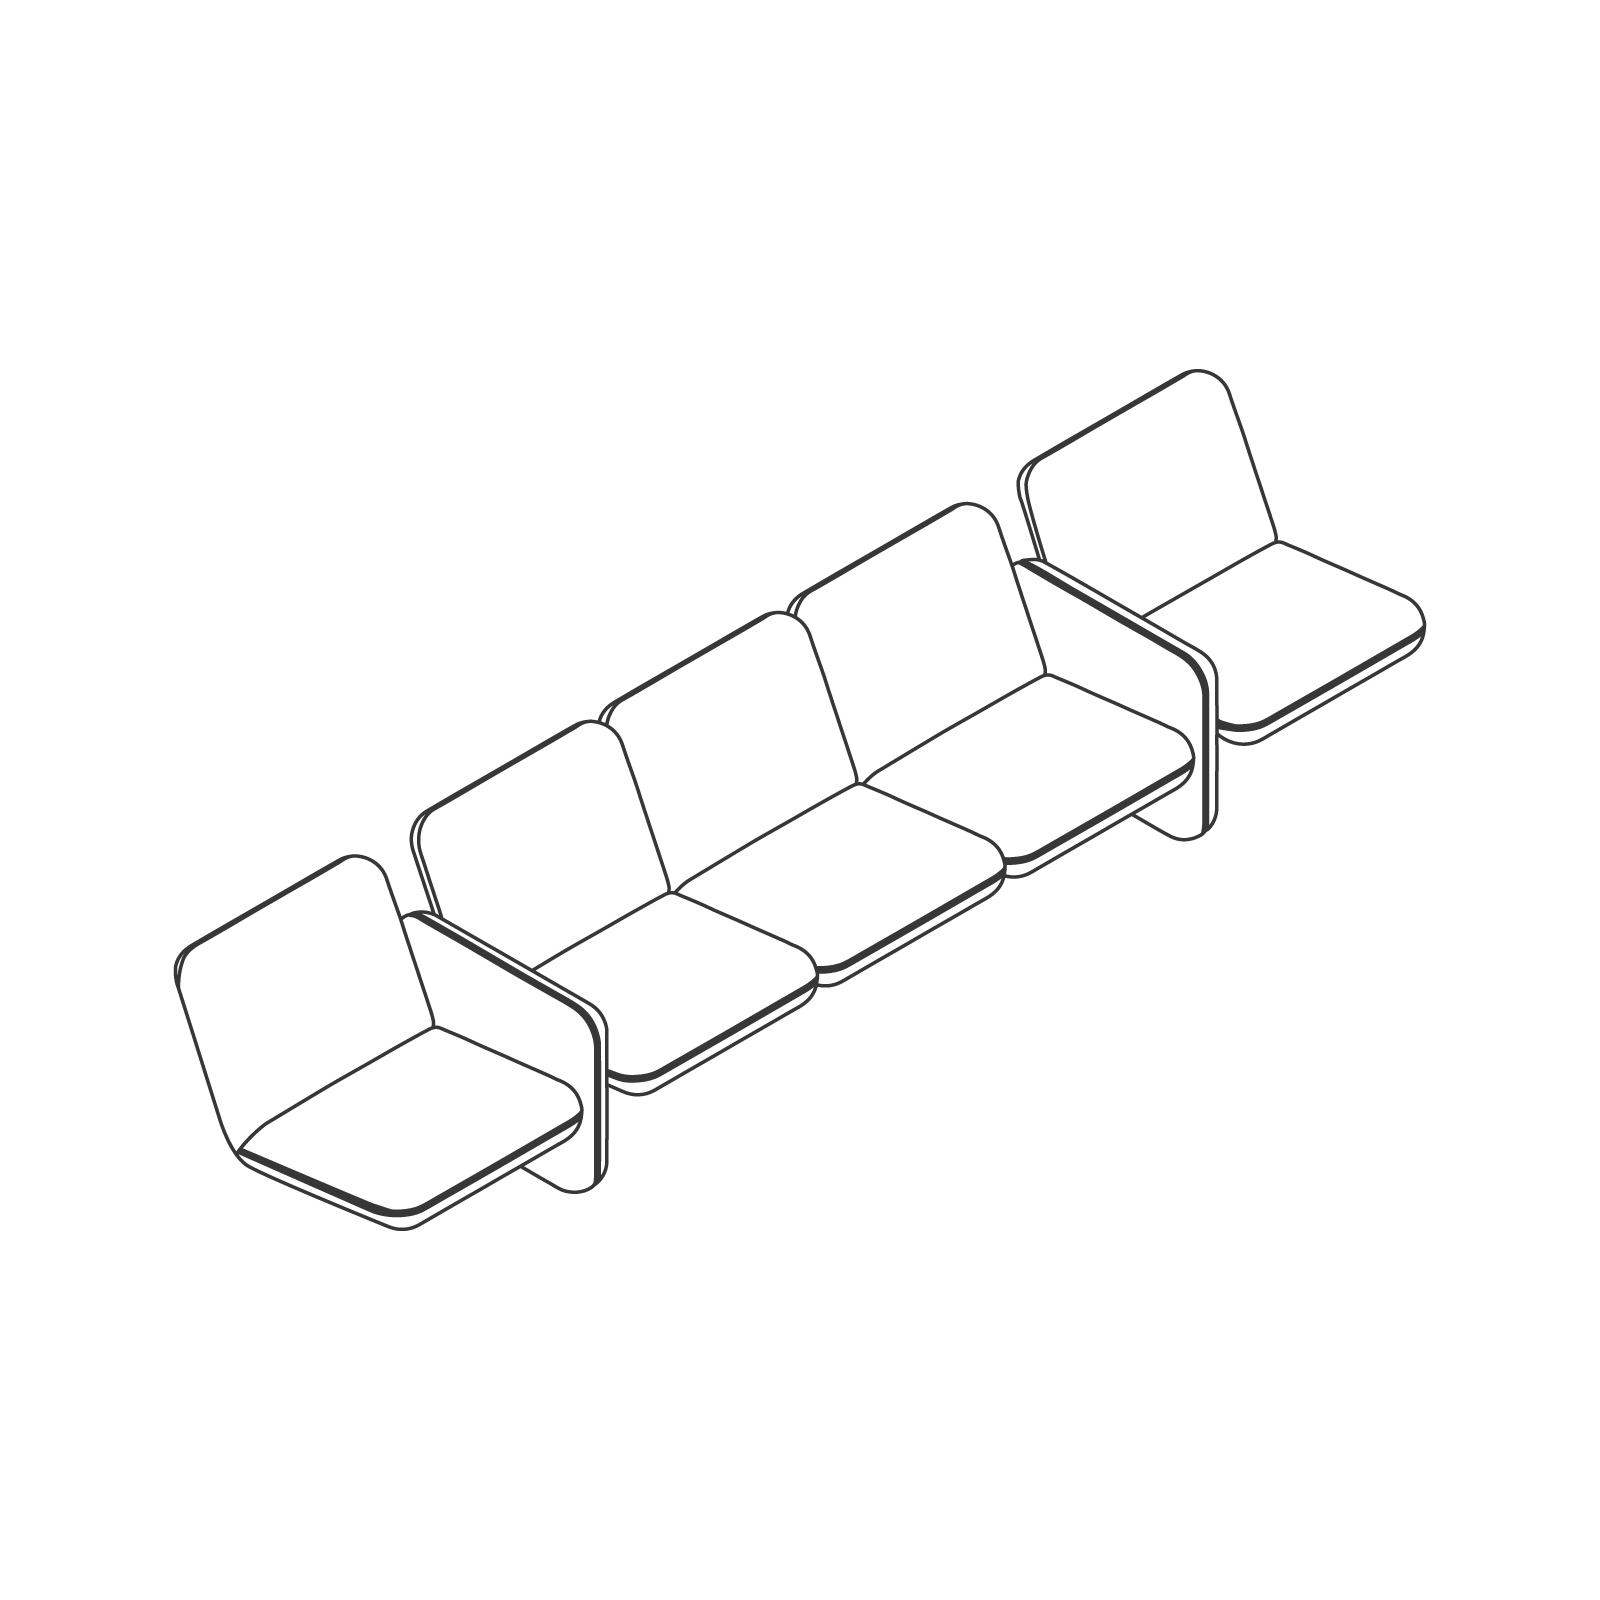 A line drawing – Wilkes Modular Sofa Group – 5-Seat